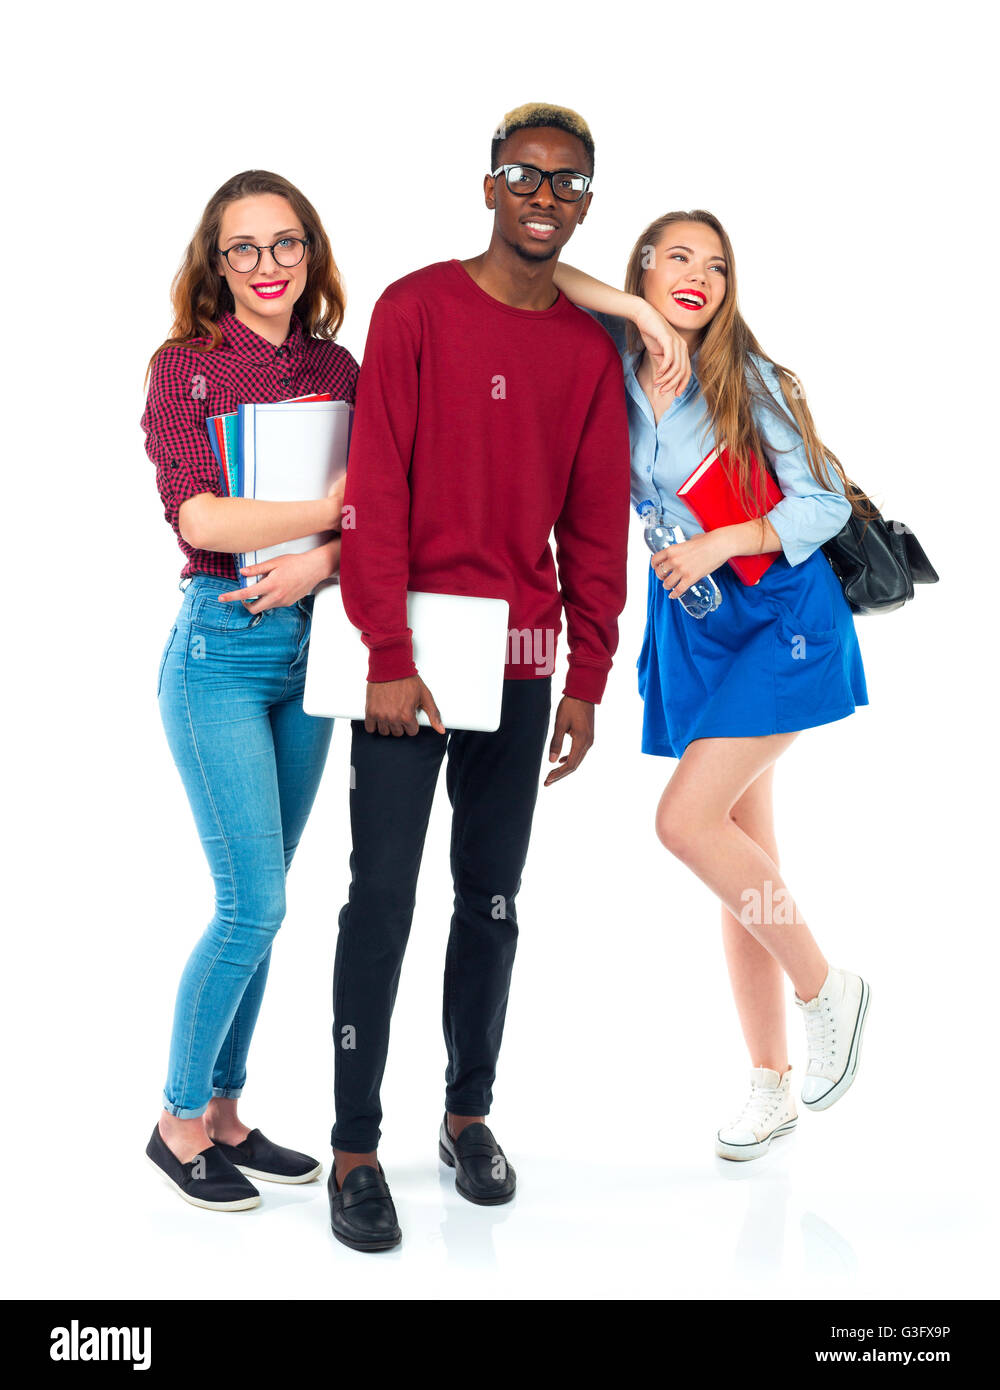 Three happy young teenager students standing and smiling with books, laptop and bags isolated on white background Stock Photo